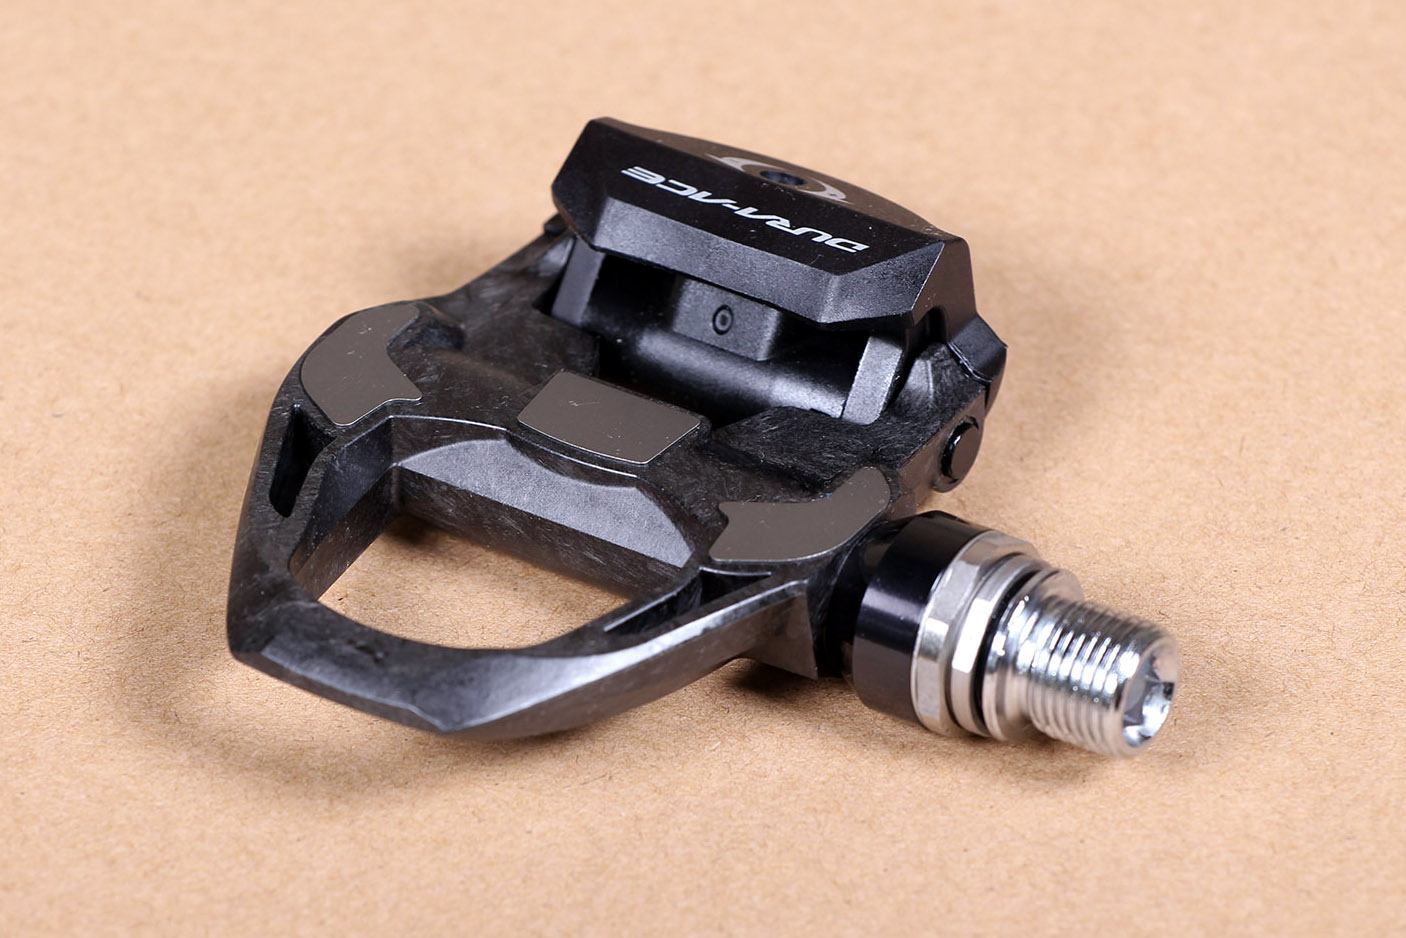 Review: Shimano Dura-Ace SPD-SL pedals |